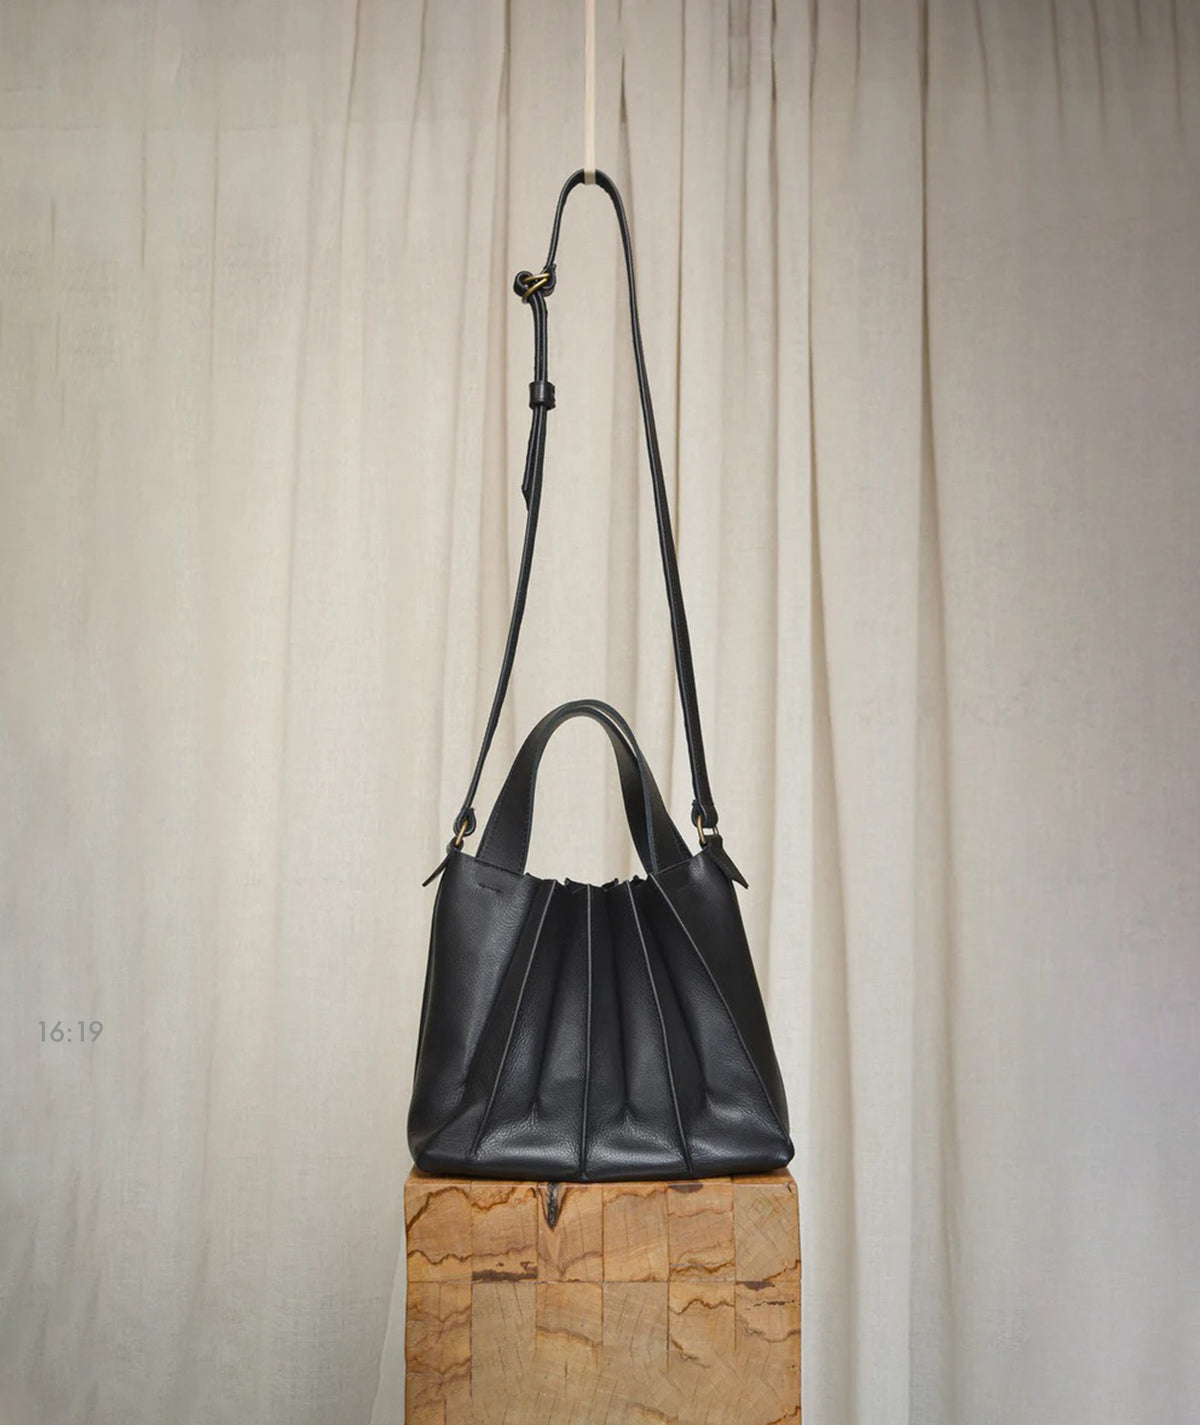 A Pleats Petite cowhide leather handbag hanging on a wooden block by Kohl &amp; Co.